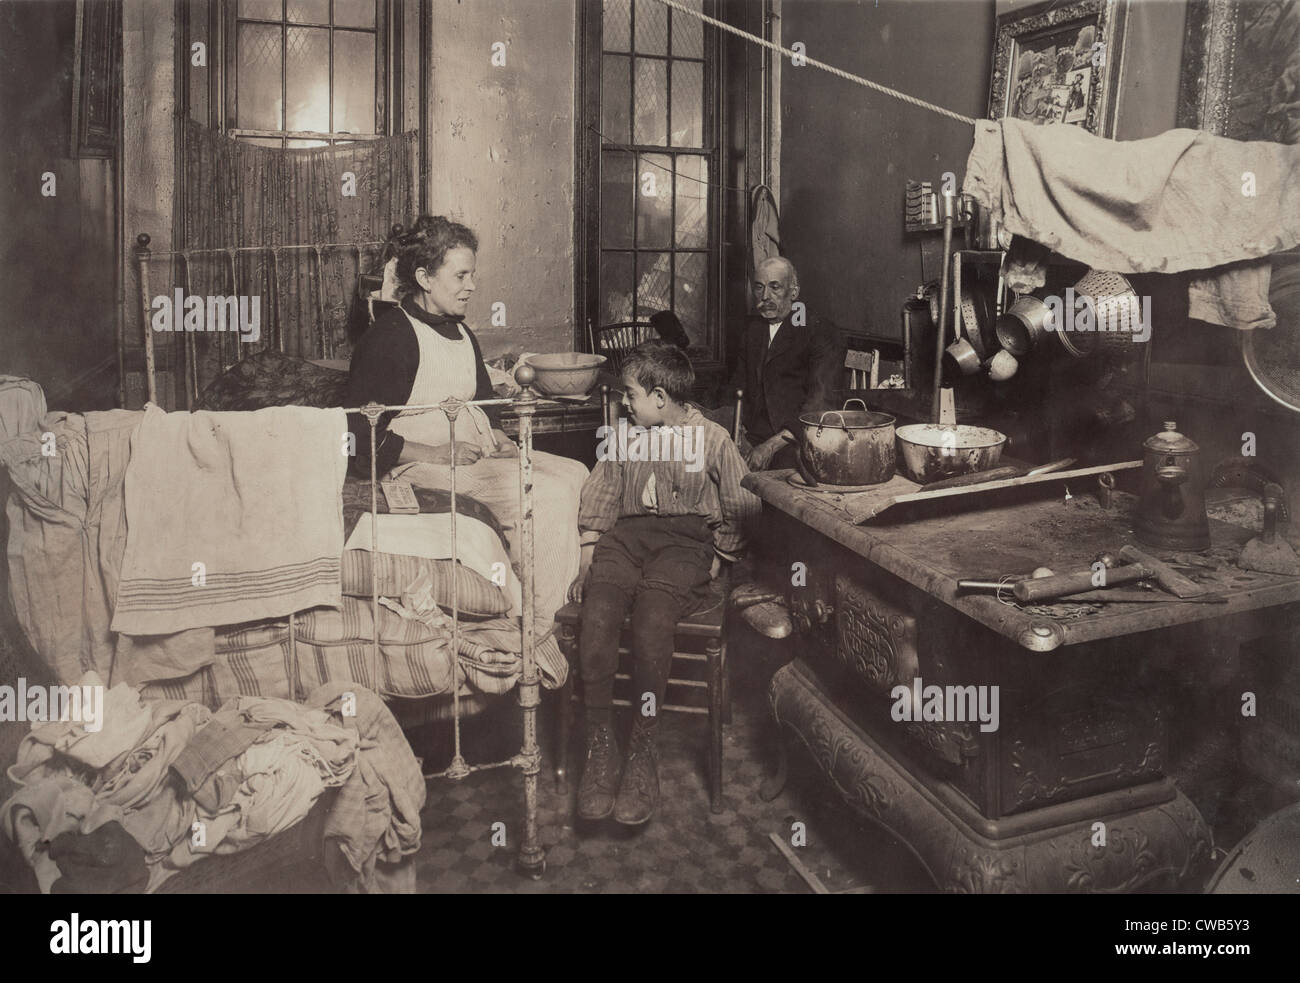 Child abuse, from caption: 'Jimmie Chinquanana, 11 Hamilton Street, In dark, inner room of his home, in the rear of their Stock Photo